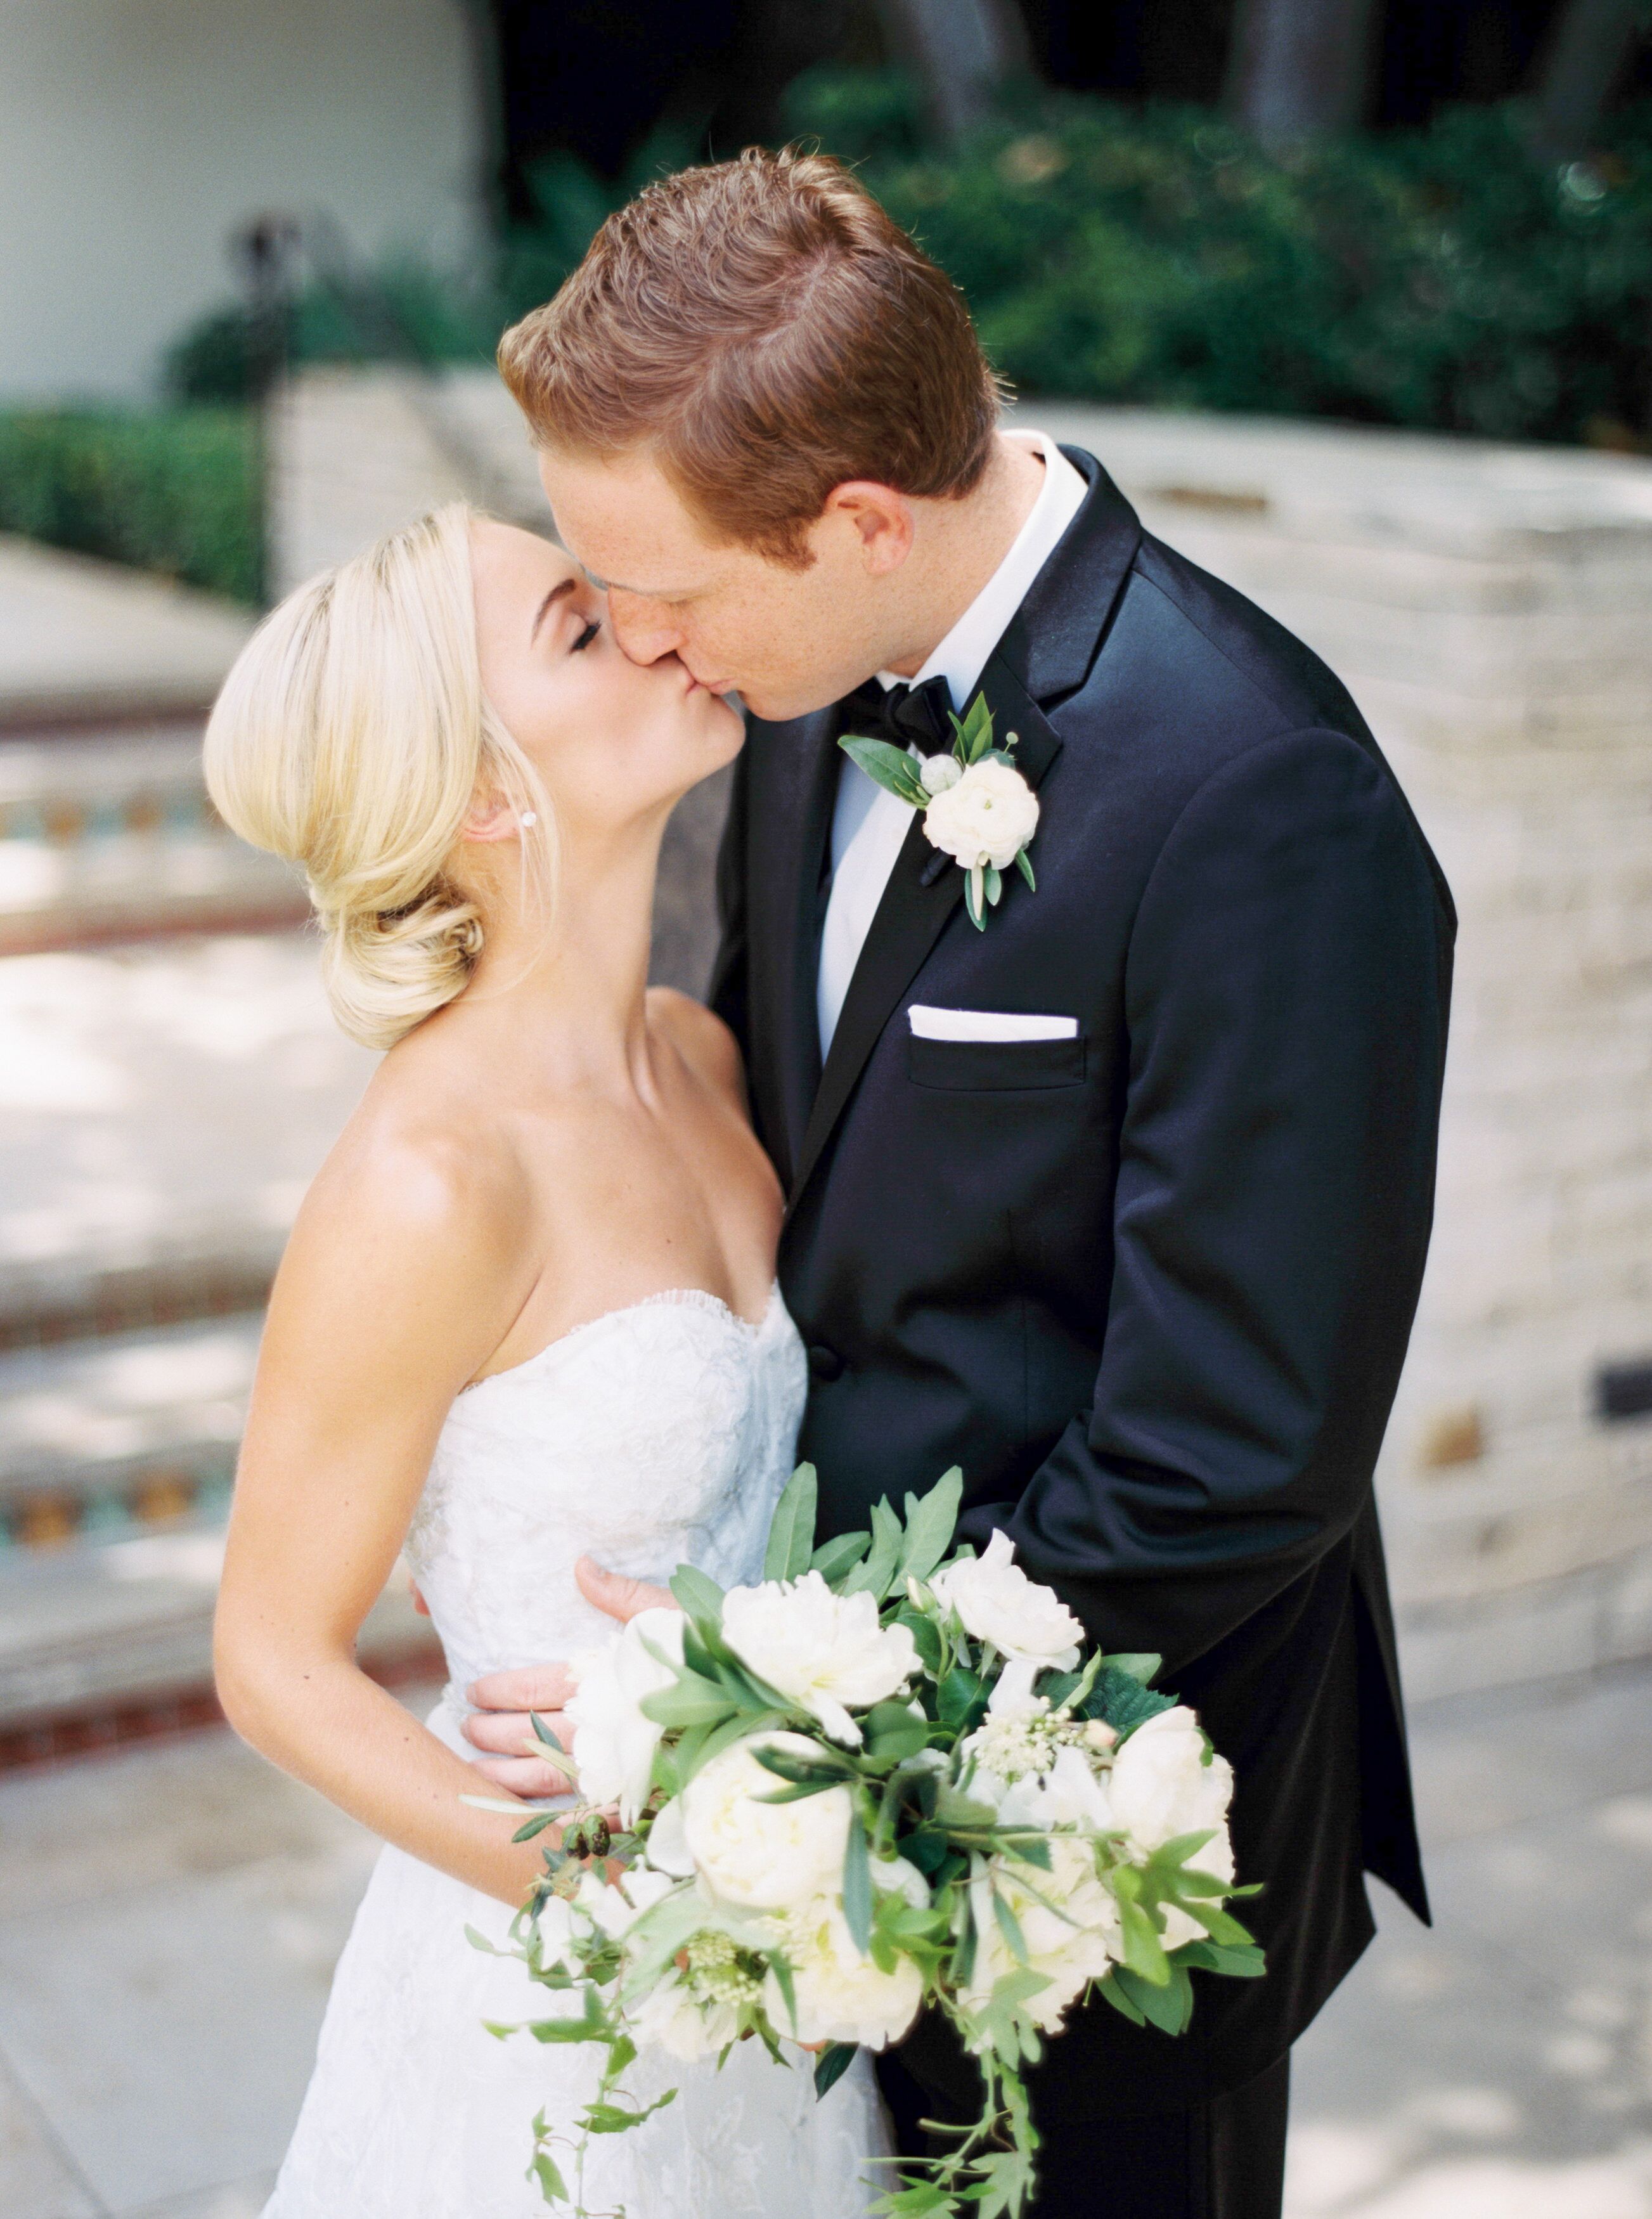 17 Beautiful Wedding Poses For The Bride And Groom 2288